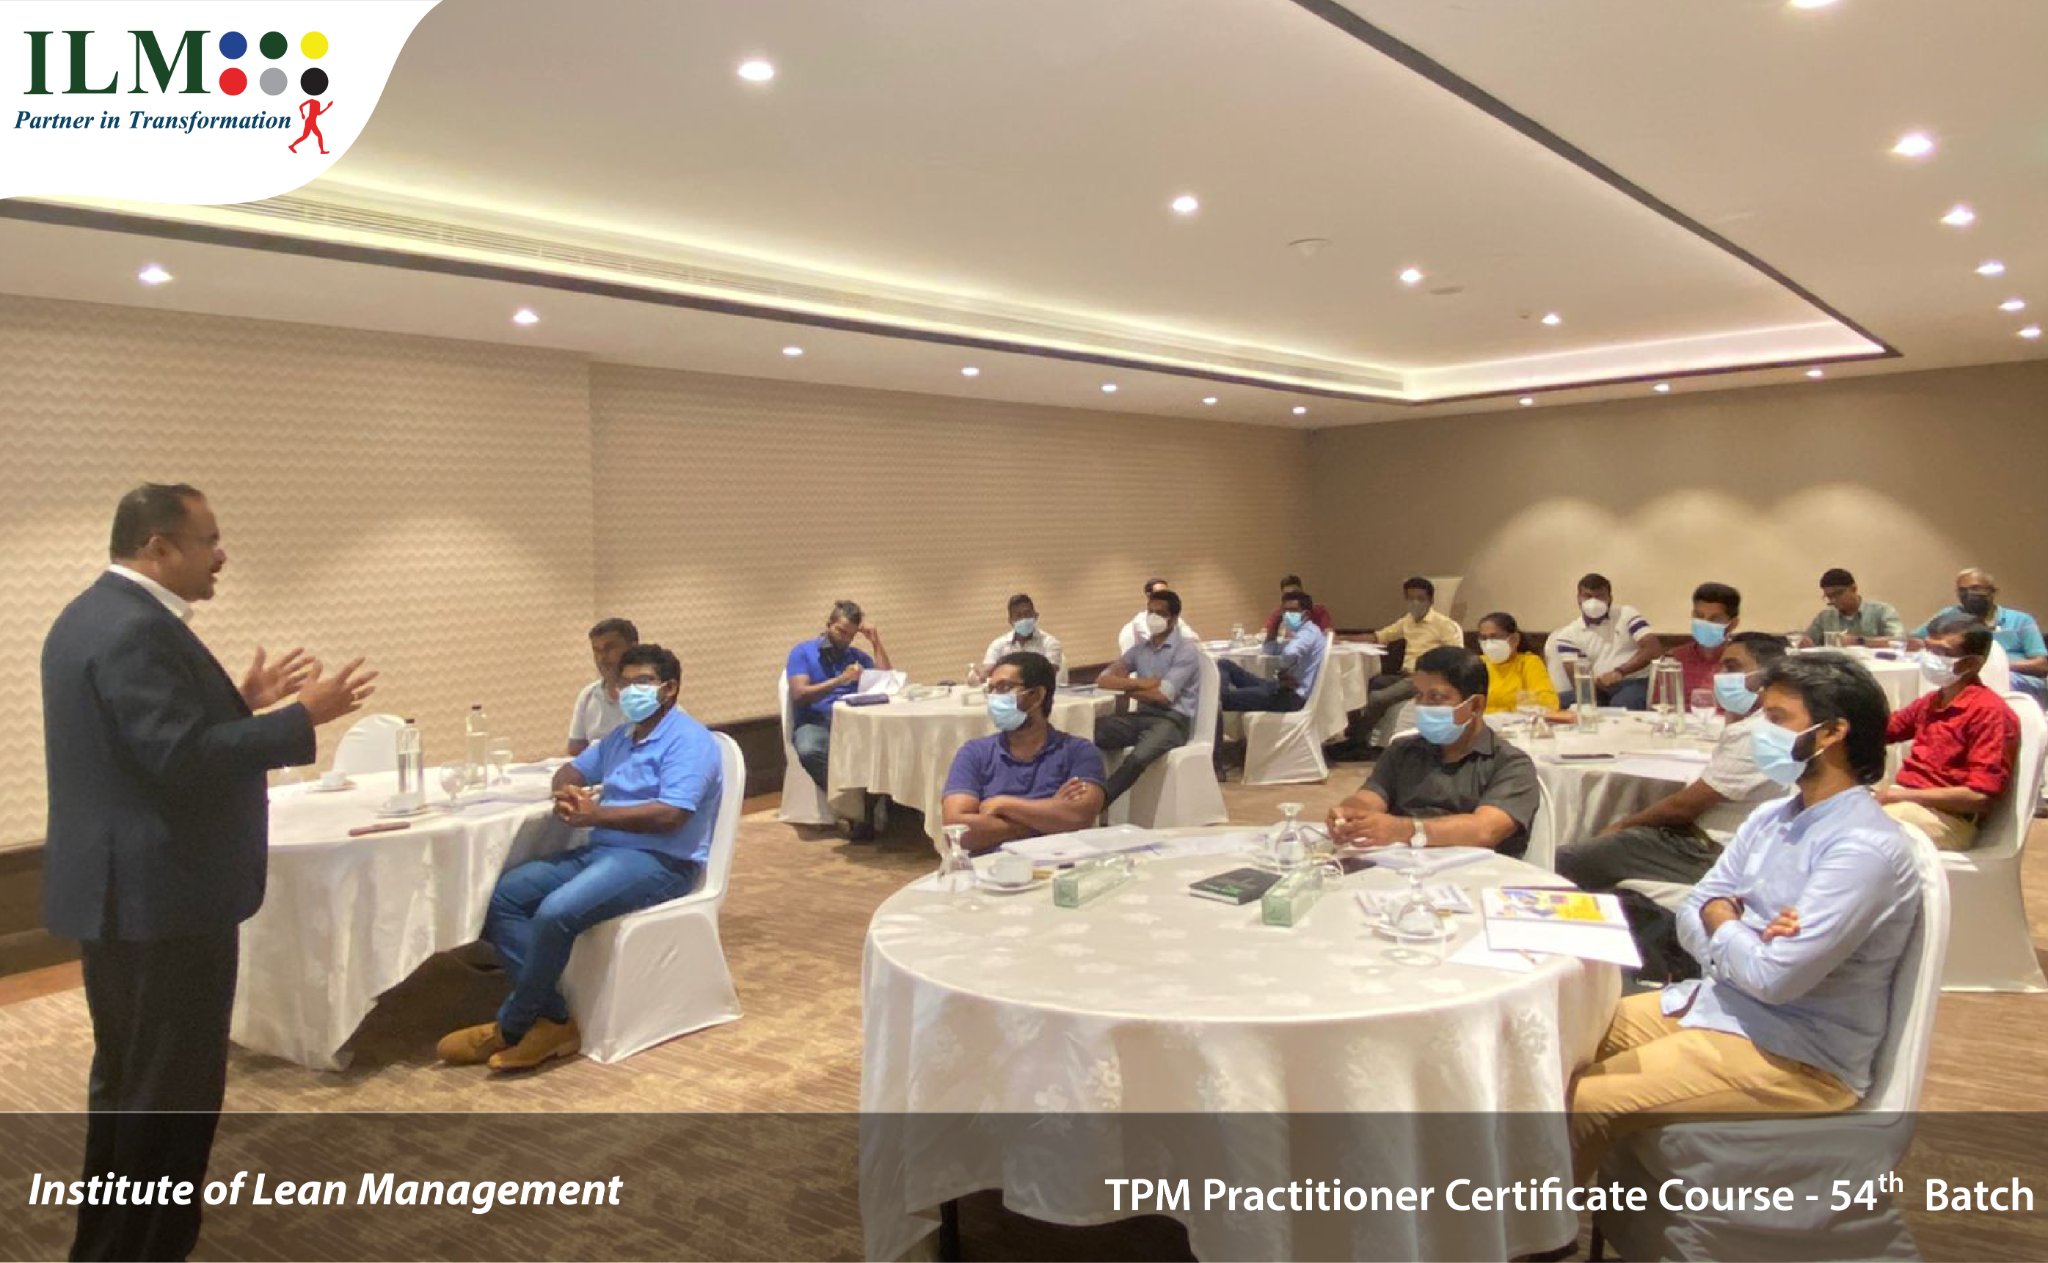 TPM Practitioner Certificate Course - 54th Batch